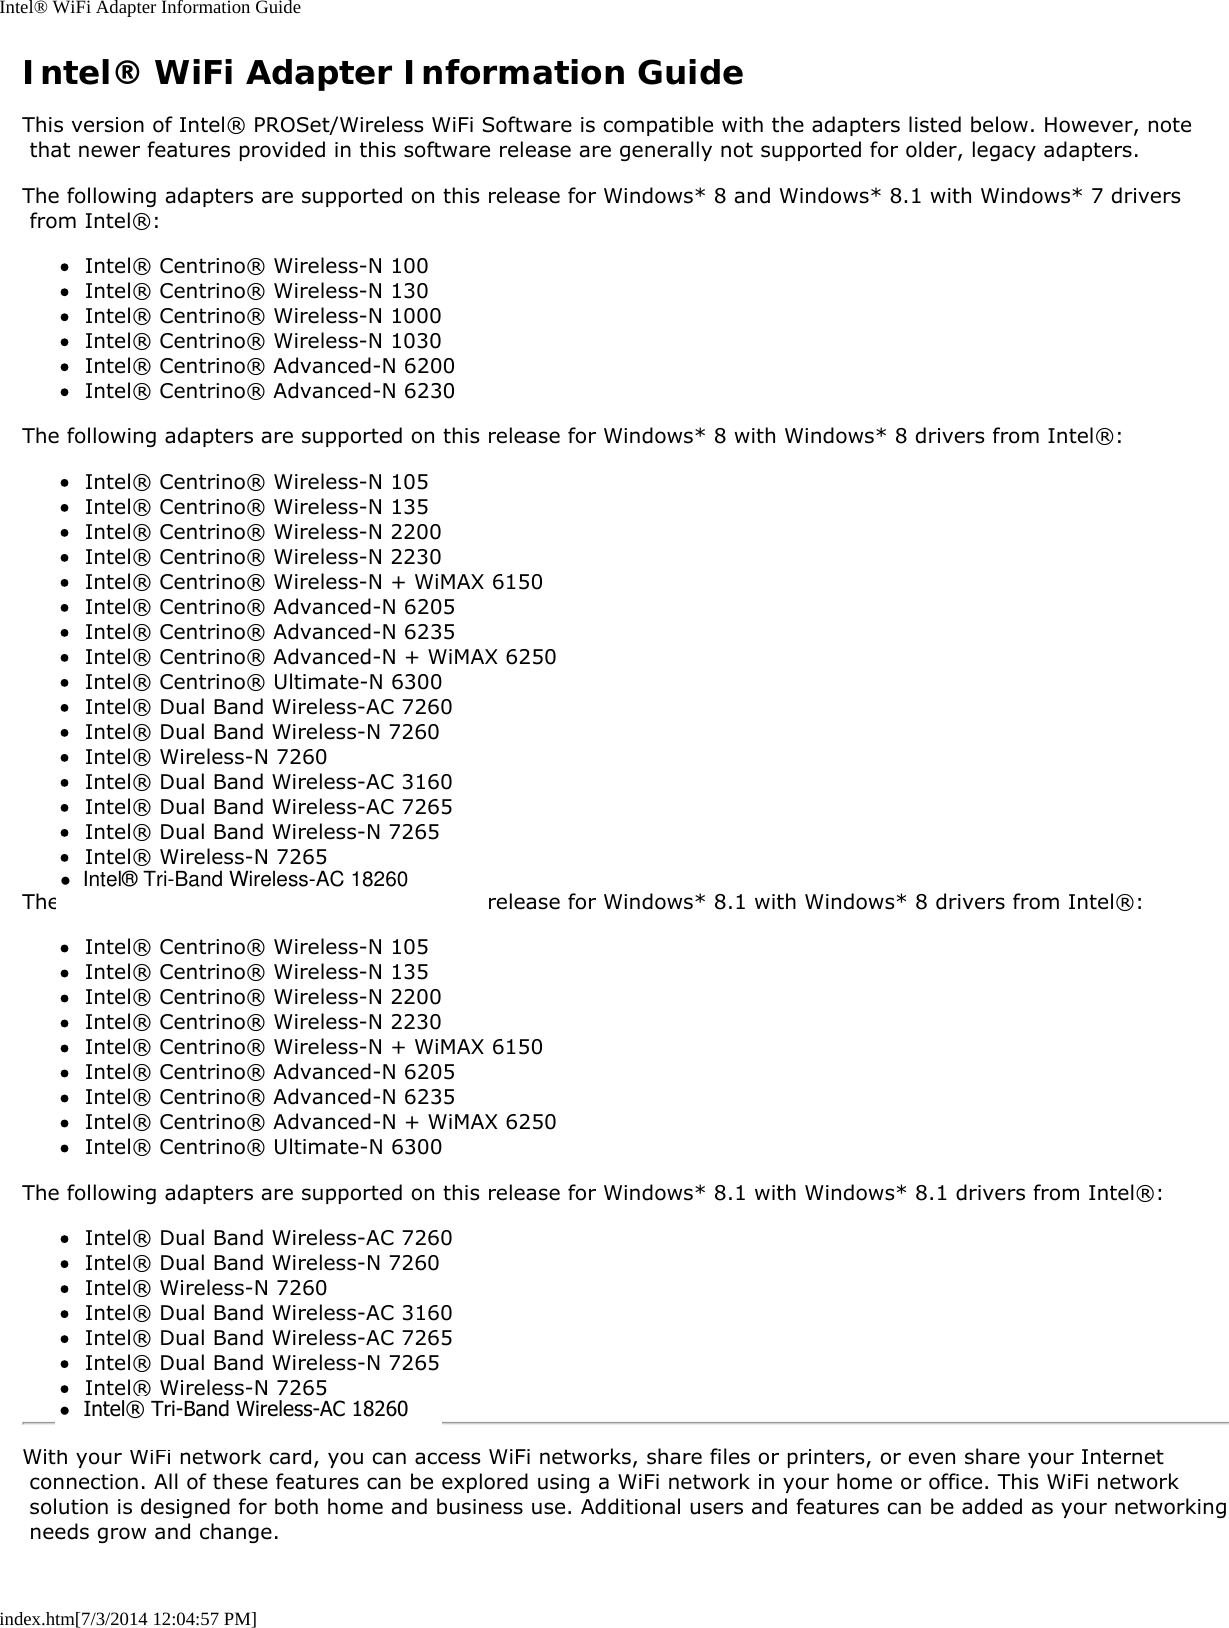 Intel® WiFi Adapter Information Guideindex.htm[7/3/2014 12:04:57 PM]Intel® WiFi Adapter Information GuideThis version of Intel® PROSet/Wireless WiFi Software is compatible with the adapters listed below. However, note that newer features provided in this software release are generally not supported for older, legacy adapters.The following adapters are supported on this release for Windows* 8 and Windows* 8.1 with Windows* 7 drivers from Intel®:Intel® Centrino® Wireless-N 100Intel® Centrino® Wireless-N 130Intel® Centrino® Wireless-N 1000Intel® Centrino® Wireless-N 1030Intel® Centrino® Advanced-N 6200Intel® Centrino® Advanced-N 6230The following adapters are supported on this release for Windows* 8 with Windows* 8 drivers from Intel®:Intel® Centrino® Wireless-N 105Intel® Centrino® Wireless-N 135Intel® Centrino® Wireless-N 2200Intel® Centrino® Wireless-N 2230Intel® Centrino® Wireless-N + WiMAX 6150Intel® Centrino® Advanced-N 6205Intel® Centrino® Advanced-N 6235Intel® Centrino® Advanced-N + WiMAX 6250Intel® Centrino® Ultimate-N 6300Intel® Dual Band Wireless-AC 7260Intel® Dual Band Wireless-N 7260Intel® Wireless-N 7260Intel® Dual Band Wireless-AC 3160Intel® Dual Band Wireless-AC 7265Intel® Dual Band Wireless-N 7265Intel® Wireless-N 7265The following adapters are supported on this release for Windows* 8.1 with Windows* 8 drivers from Intel®:Intel® Centrino® Wireless-N 105Intel® Centrino® Wireless-N 135Intel® Centrino® Wireless-N 2200Intel® Centrino® Wireless-N 2230Intel® Centrino® Wireless-N + WiMAX 6150Intel® Centrino® Advanced-N 6205Intel® Centrino® Advanced-N 6235Intel® Centrino® Advanced-N + WiMAX 6250Intel® Centrino® Ultimate-N 6300The following adapters are supported on this release for Windows* 8.1 with Windows* 8.1 drivers from Intel®:Intel® Dual Band Wireless-AC 7260Intel® Dual Band Wireless-N 7260Intel® Wireless-N 7260Intel® Dual Band Wireless-AC 3160Intel® Dual Band Wireless-AC 7265Intel® Dual Band Wireless-N 7265Intel® Wireless-N 7265With your WiFi network card, you can access WiFi networks, share files or printers, or even share your Internet connection. All of these features can be explored using a WiFi network in your home or office. This WiFi network solution is designed for both home and business use. Additional users and features can be added as your networking needs grow and change.●  Intel® Tri-Band Wireless-AC 18260 ●  Intel® Tri-Band Wireless-AC 18260 